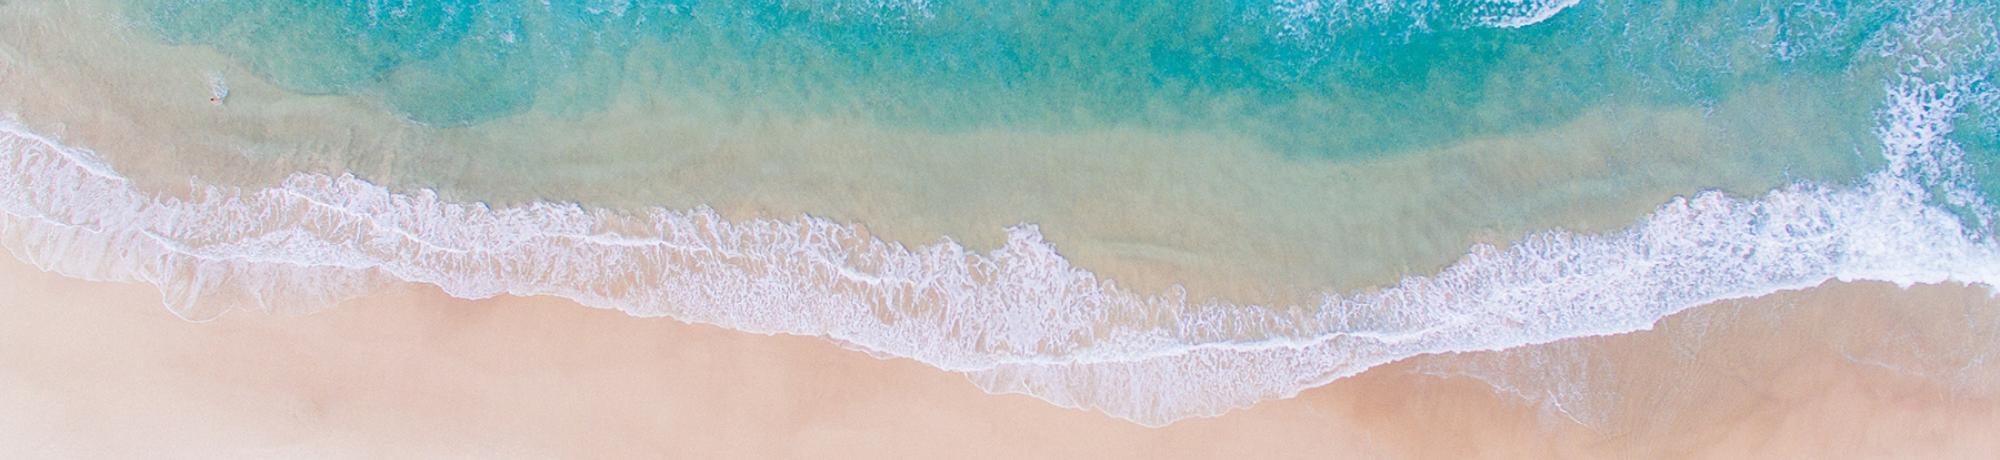 Top down view of teal waves sweeping across a light pink, sandy shore